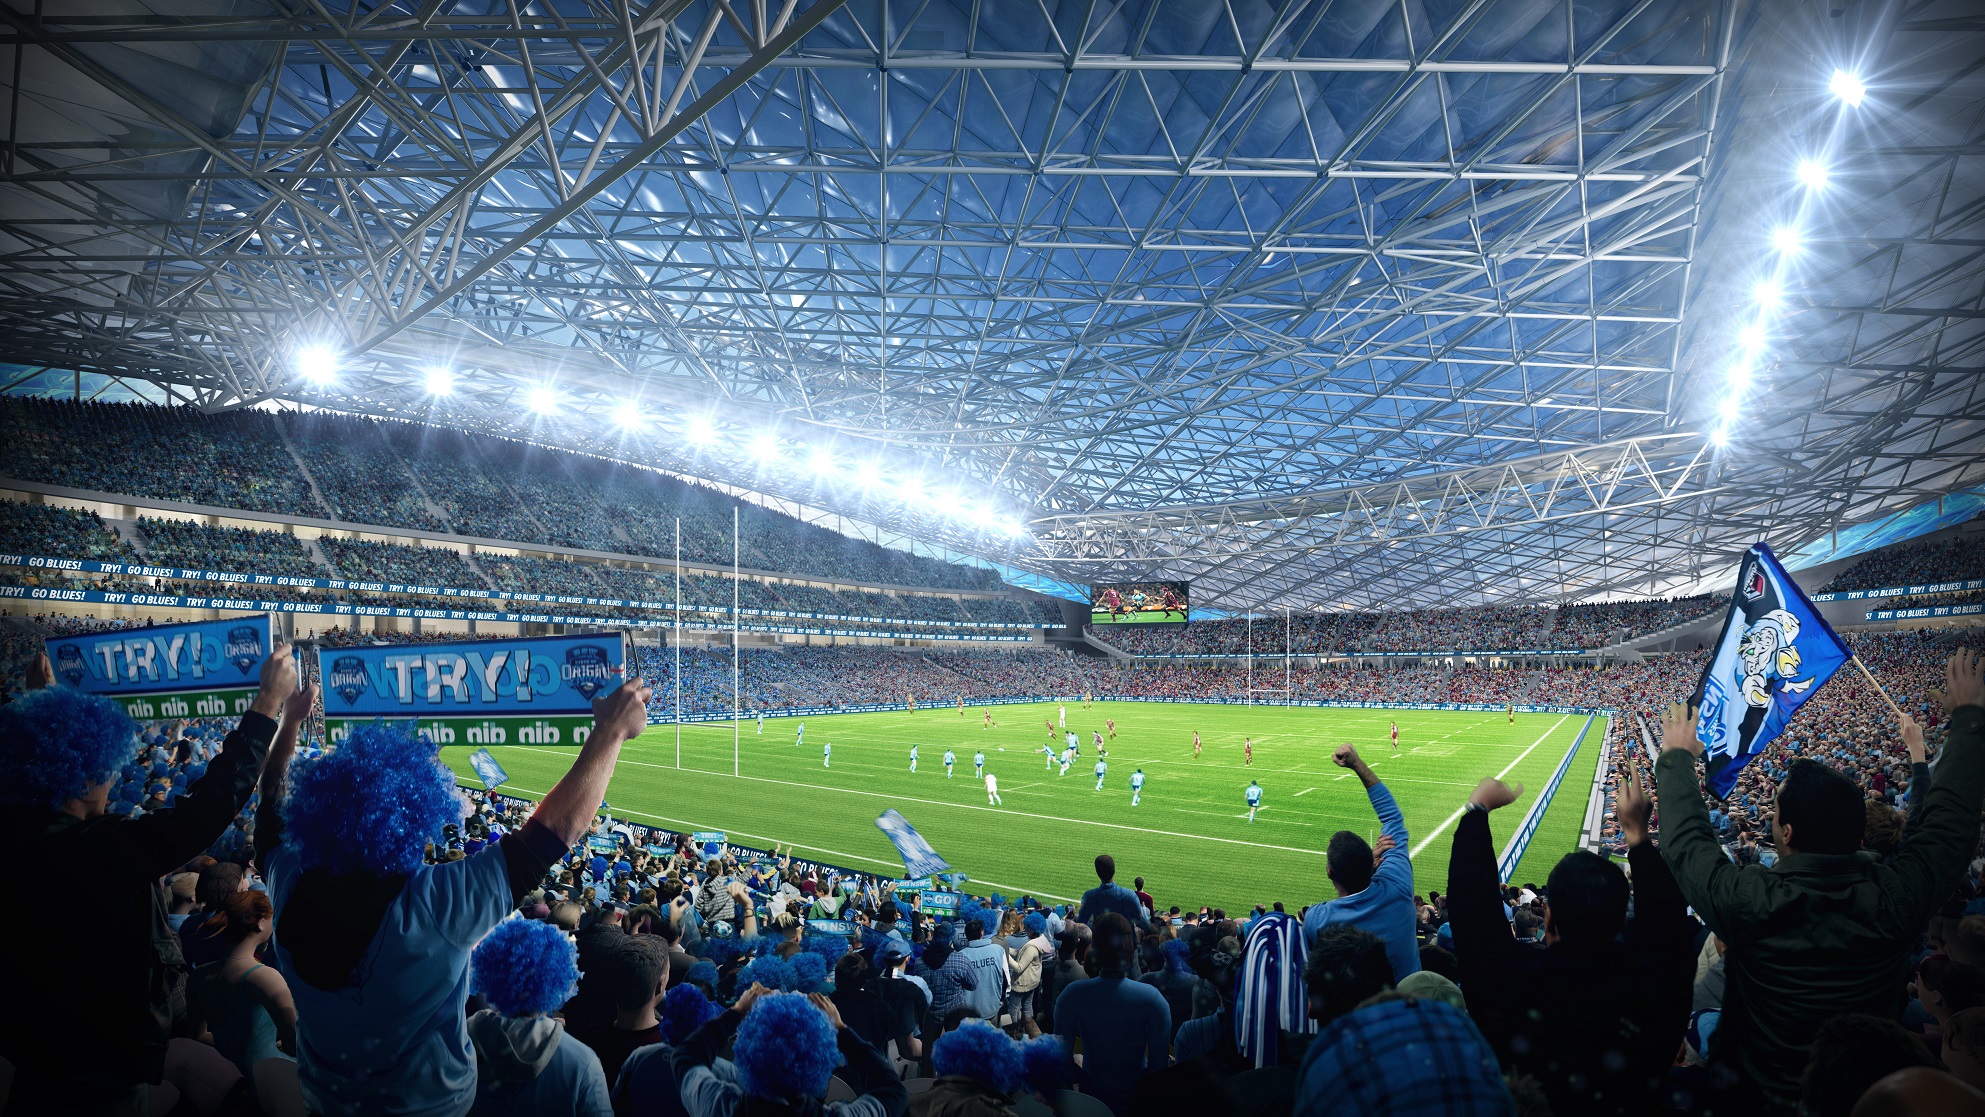 Sydney's Olympic Stadium Wants A $350 Million Upgrade That Includes ...